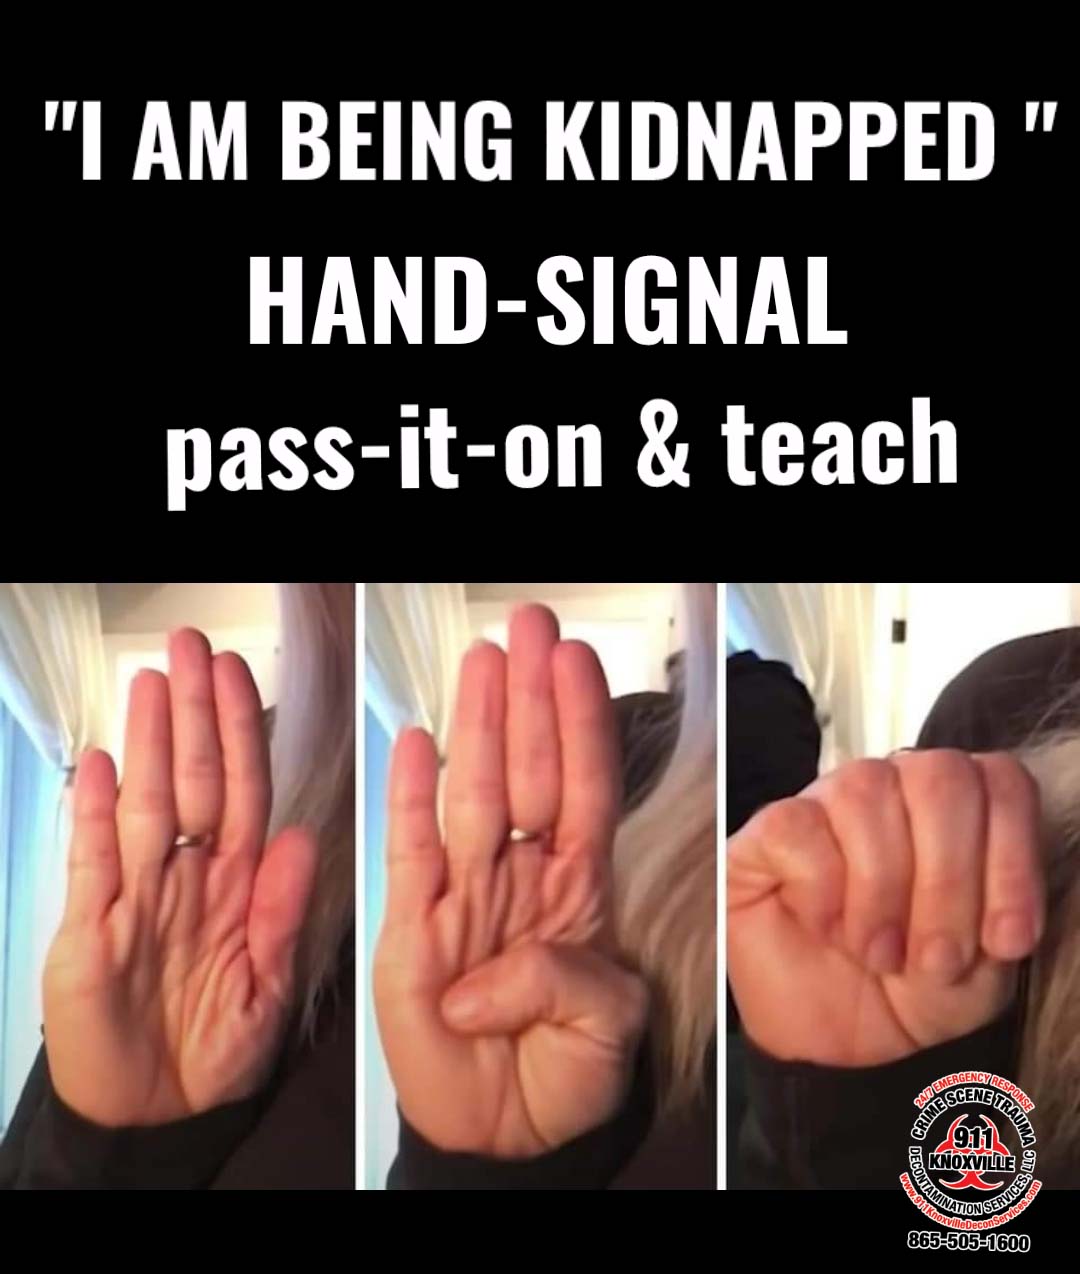 The Hand Signal for “I Am Being Kidnapped”